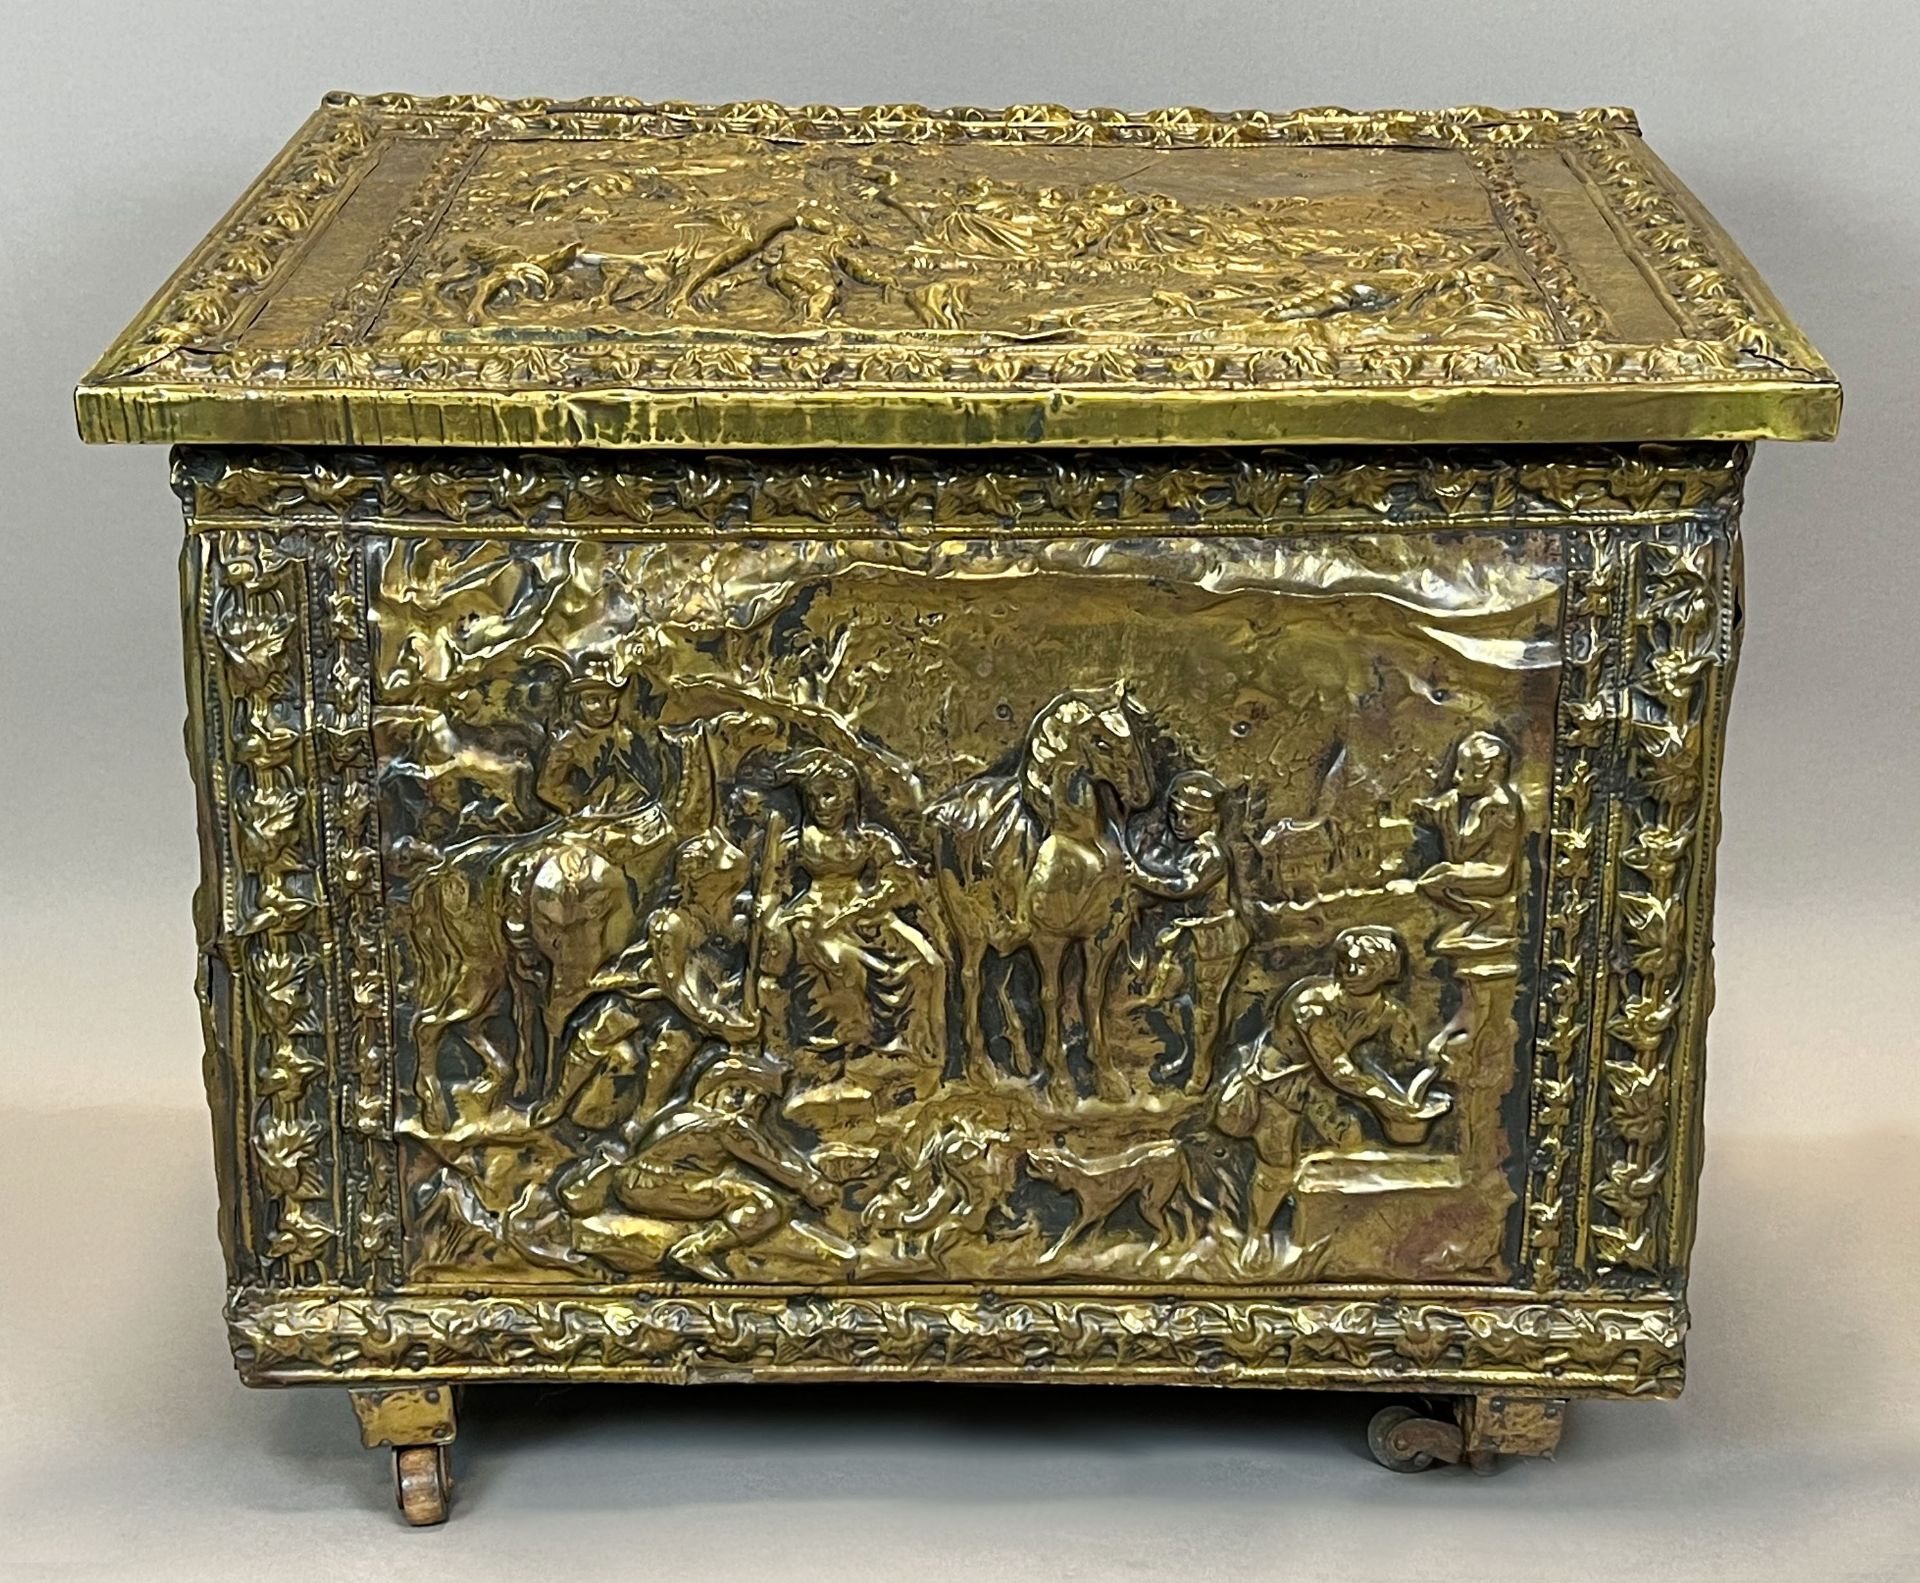 Small wooden chest with brass plate decoration. Probably 19th century.